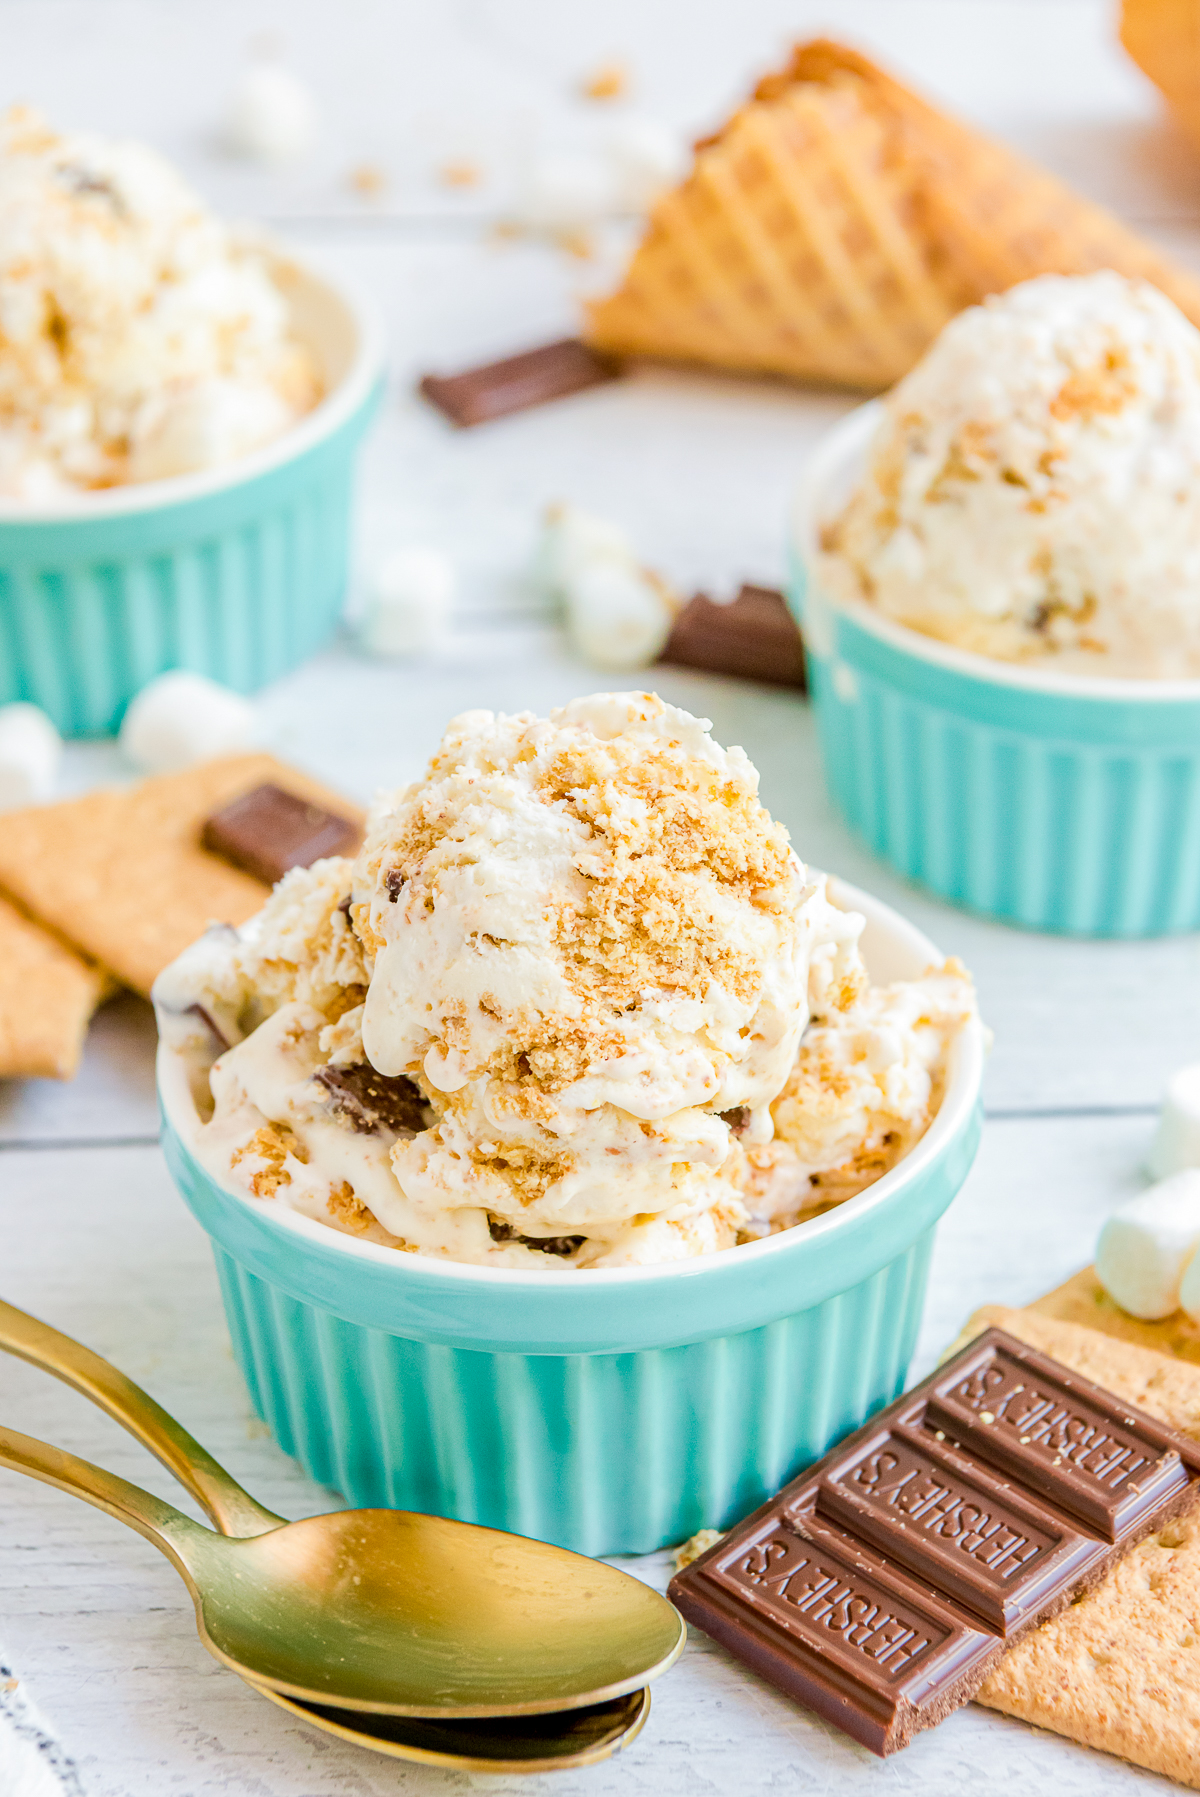 Mini bowls filled with S'mores Ice Cream.